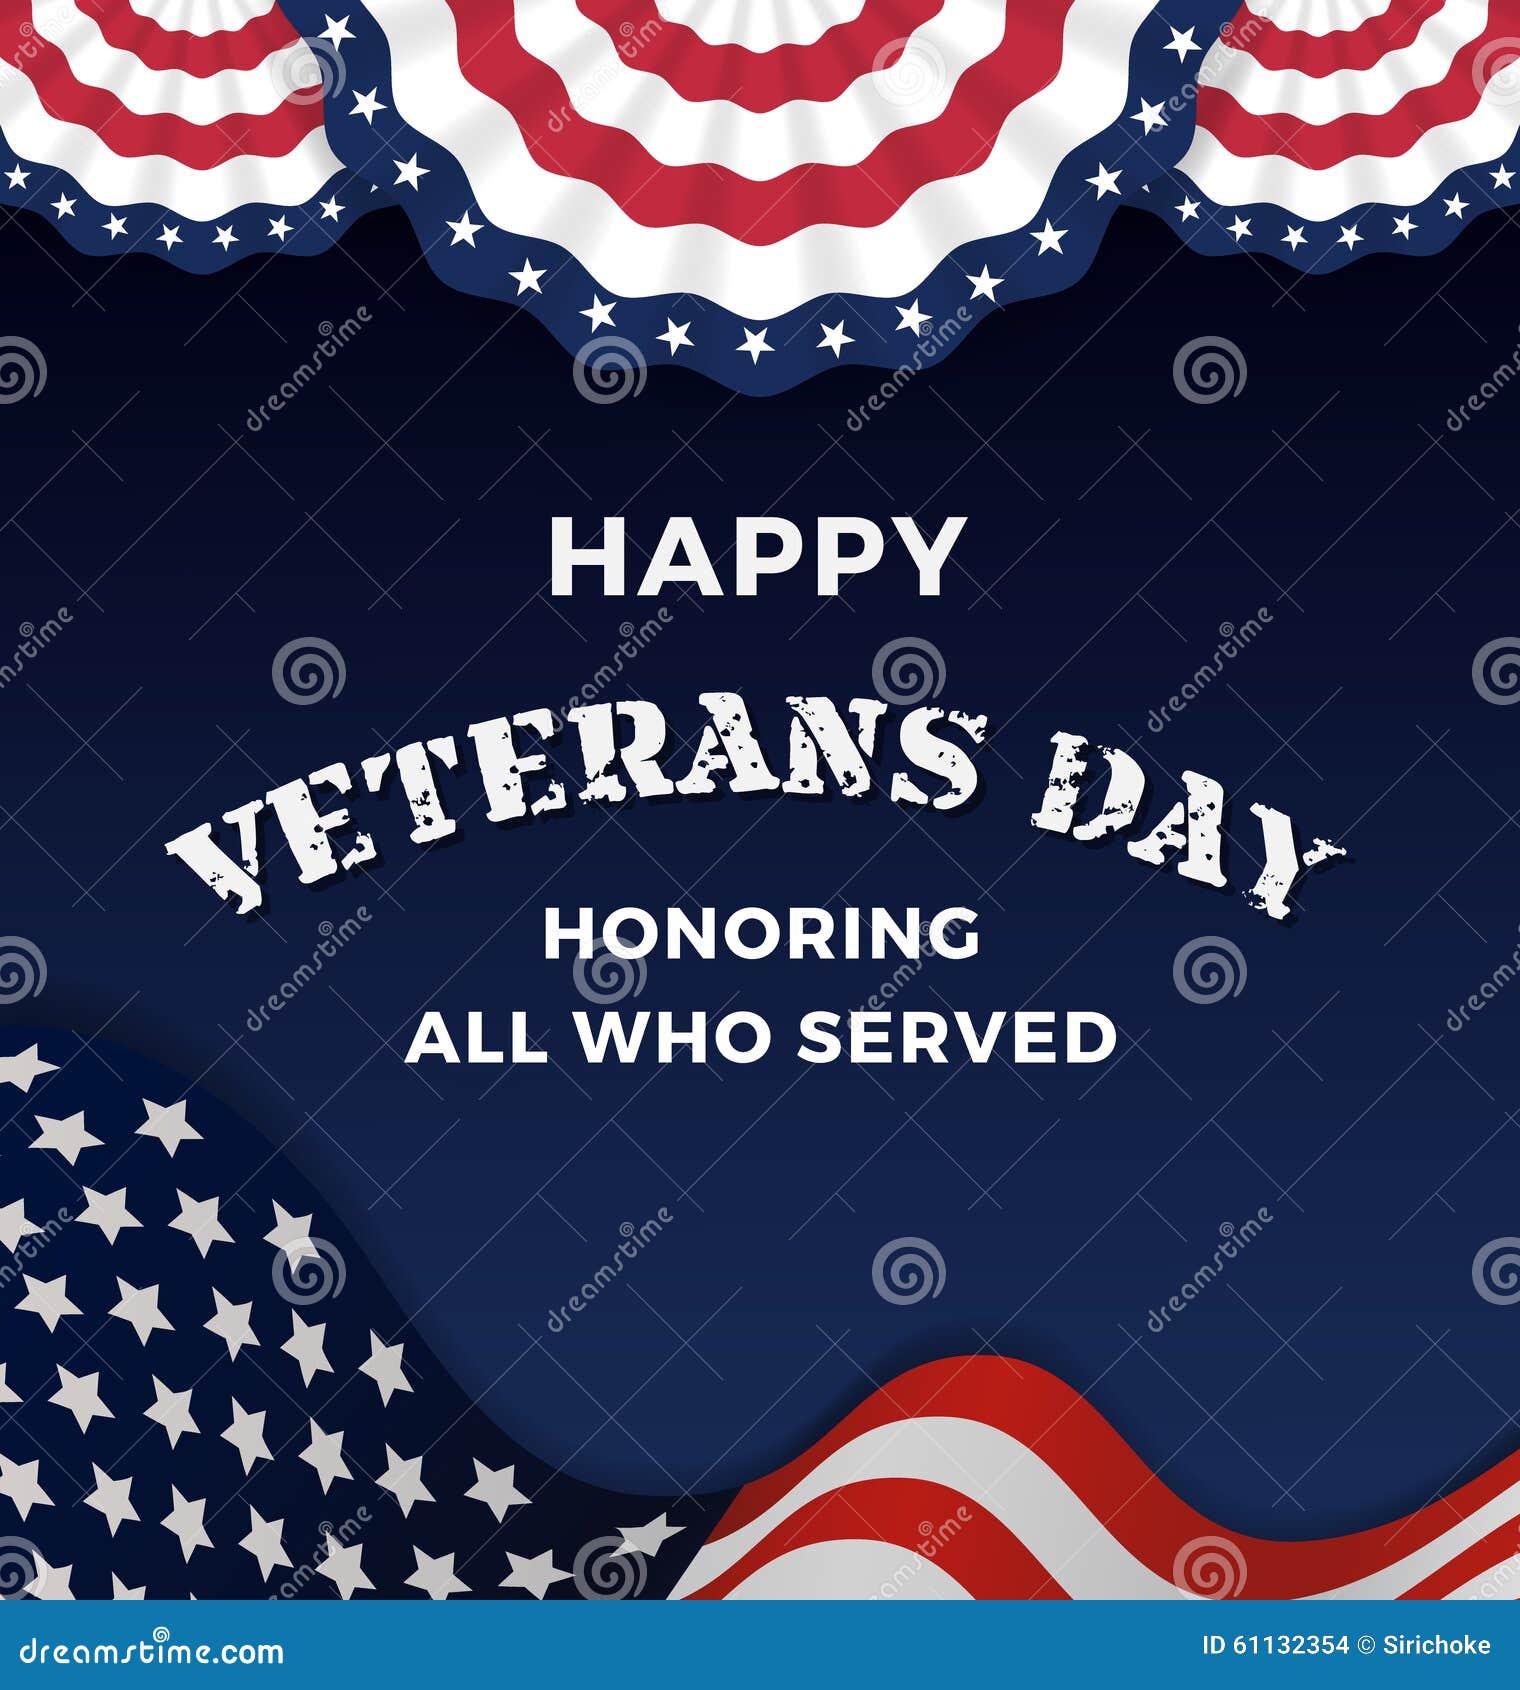 Happy Veterans Day and Background With Wavy USA Flag Design. Vector 